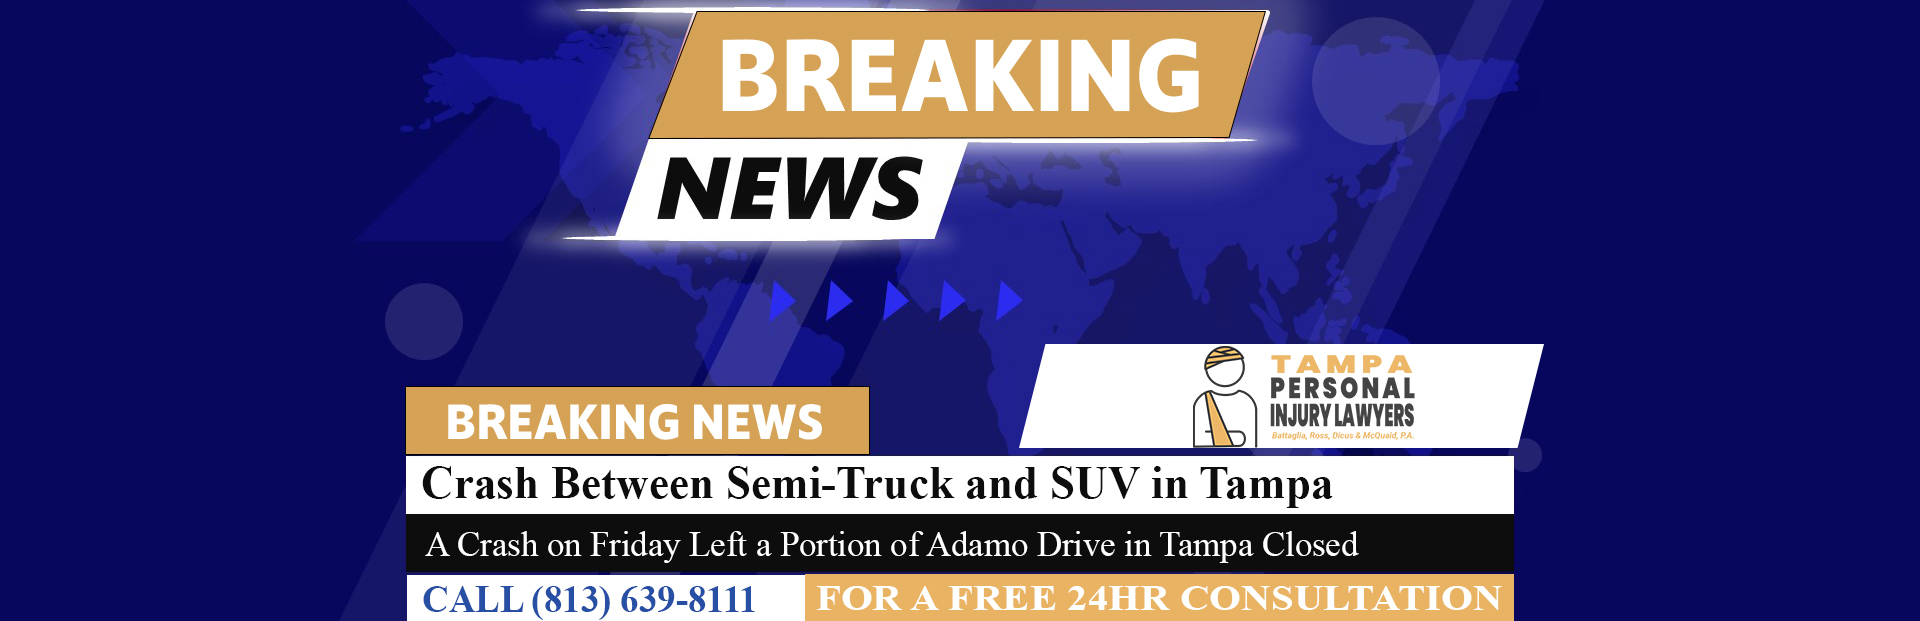 [11-18-23] Crash Between Semi-Truck and SUV Closes Portion of Road in Tampa